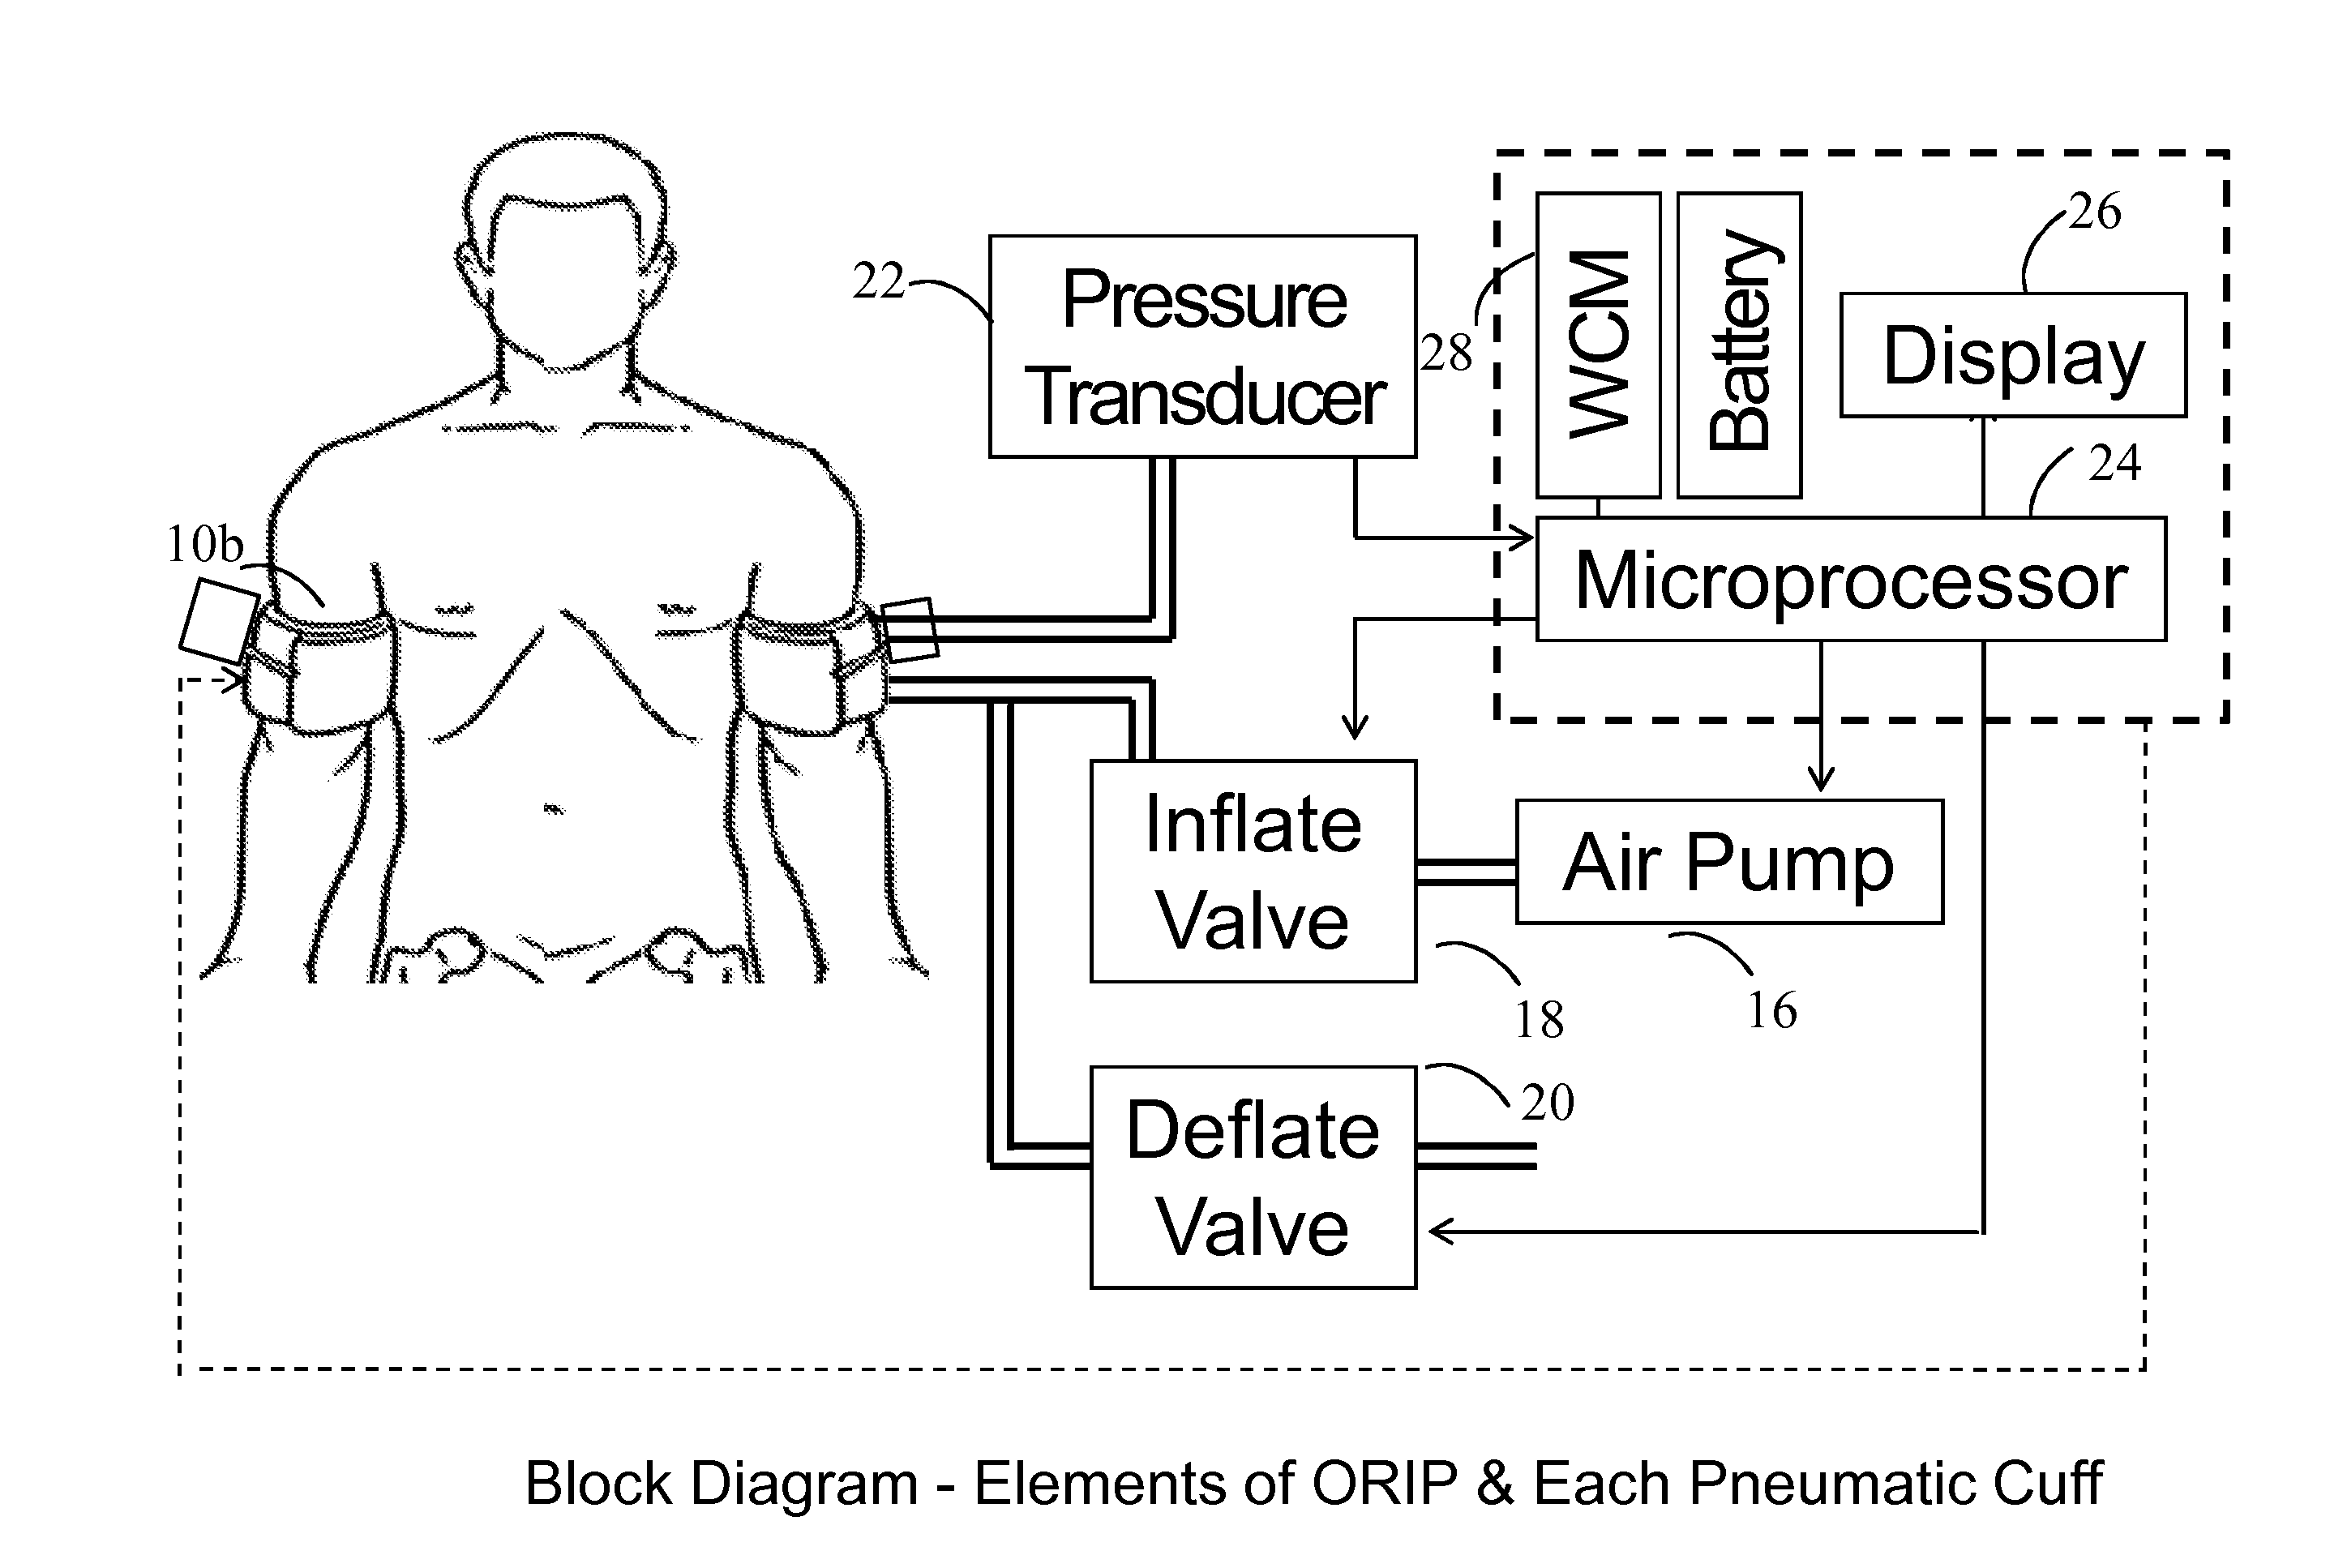 Methods and apparatus for optimal remote ischemic preconditioning (ORIP) for preventing ischemia-reperfusion injuries to organs